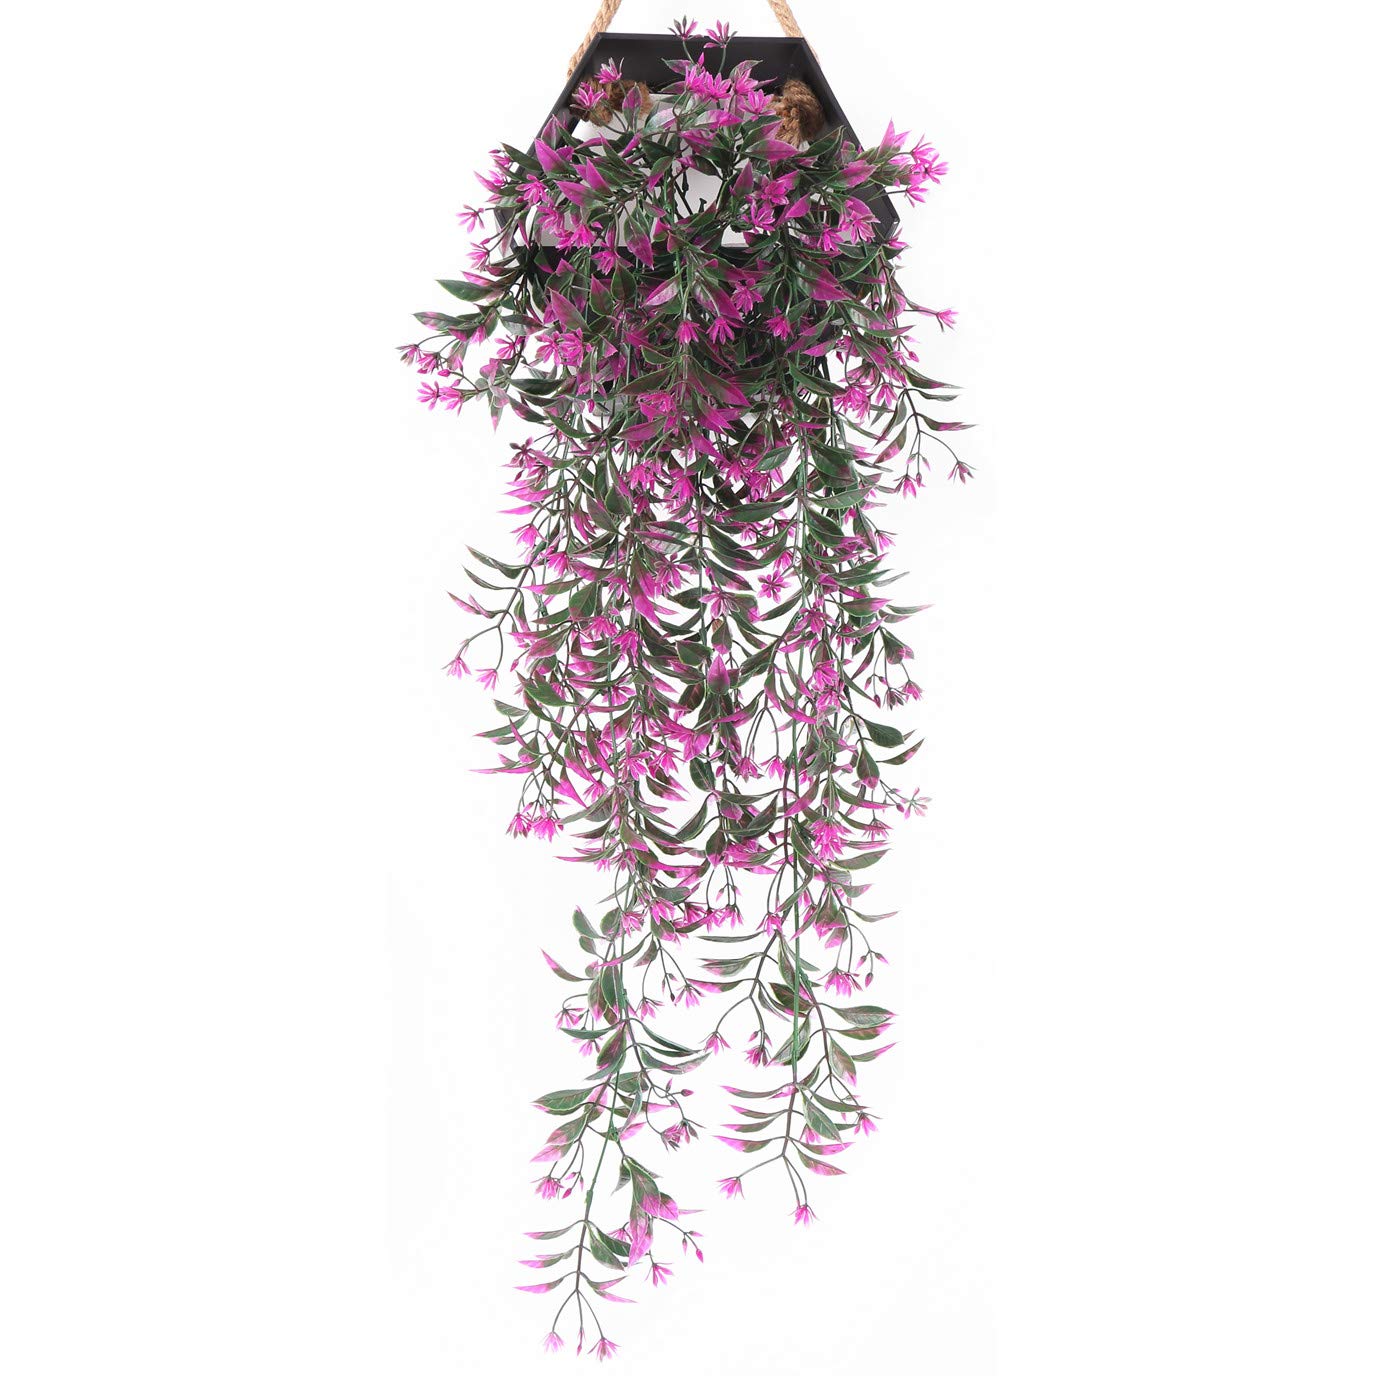 Artificial Hanging Ivy, PASYOU Vine Plastic Plants Grass Leaves Foliage Vines, UV Resistant Greenery Fake Flowers for Home Indoor Outdoor Garden Door Wall Wedding Party DIY Decoration - Fuchsia 4 Pack